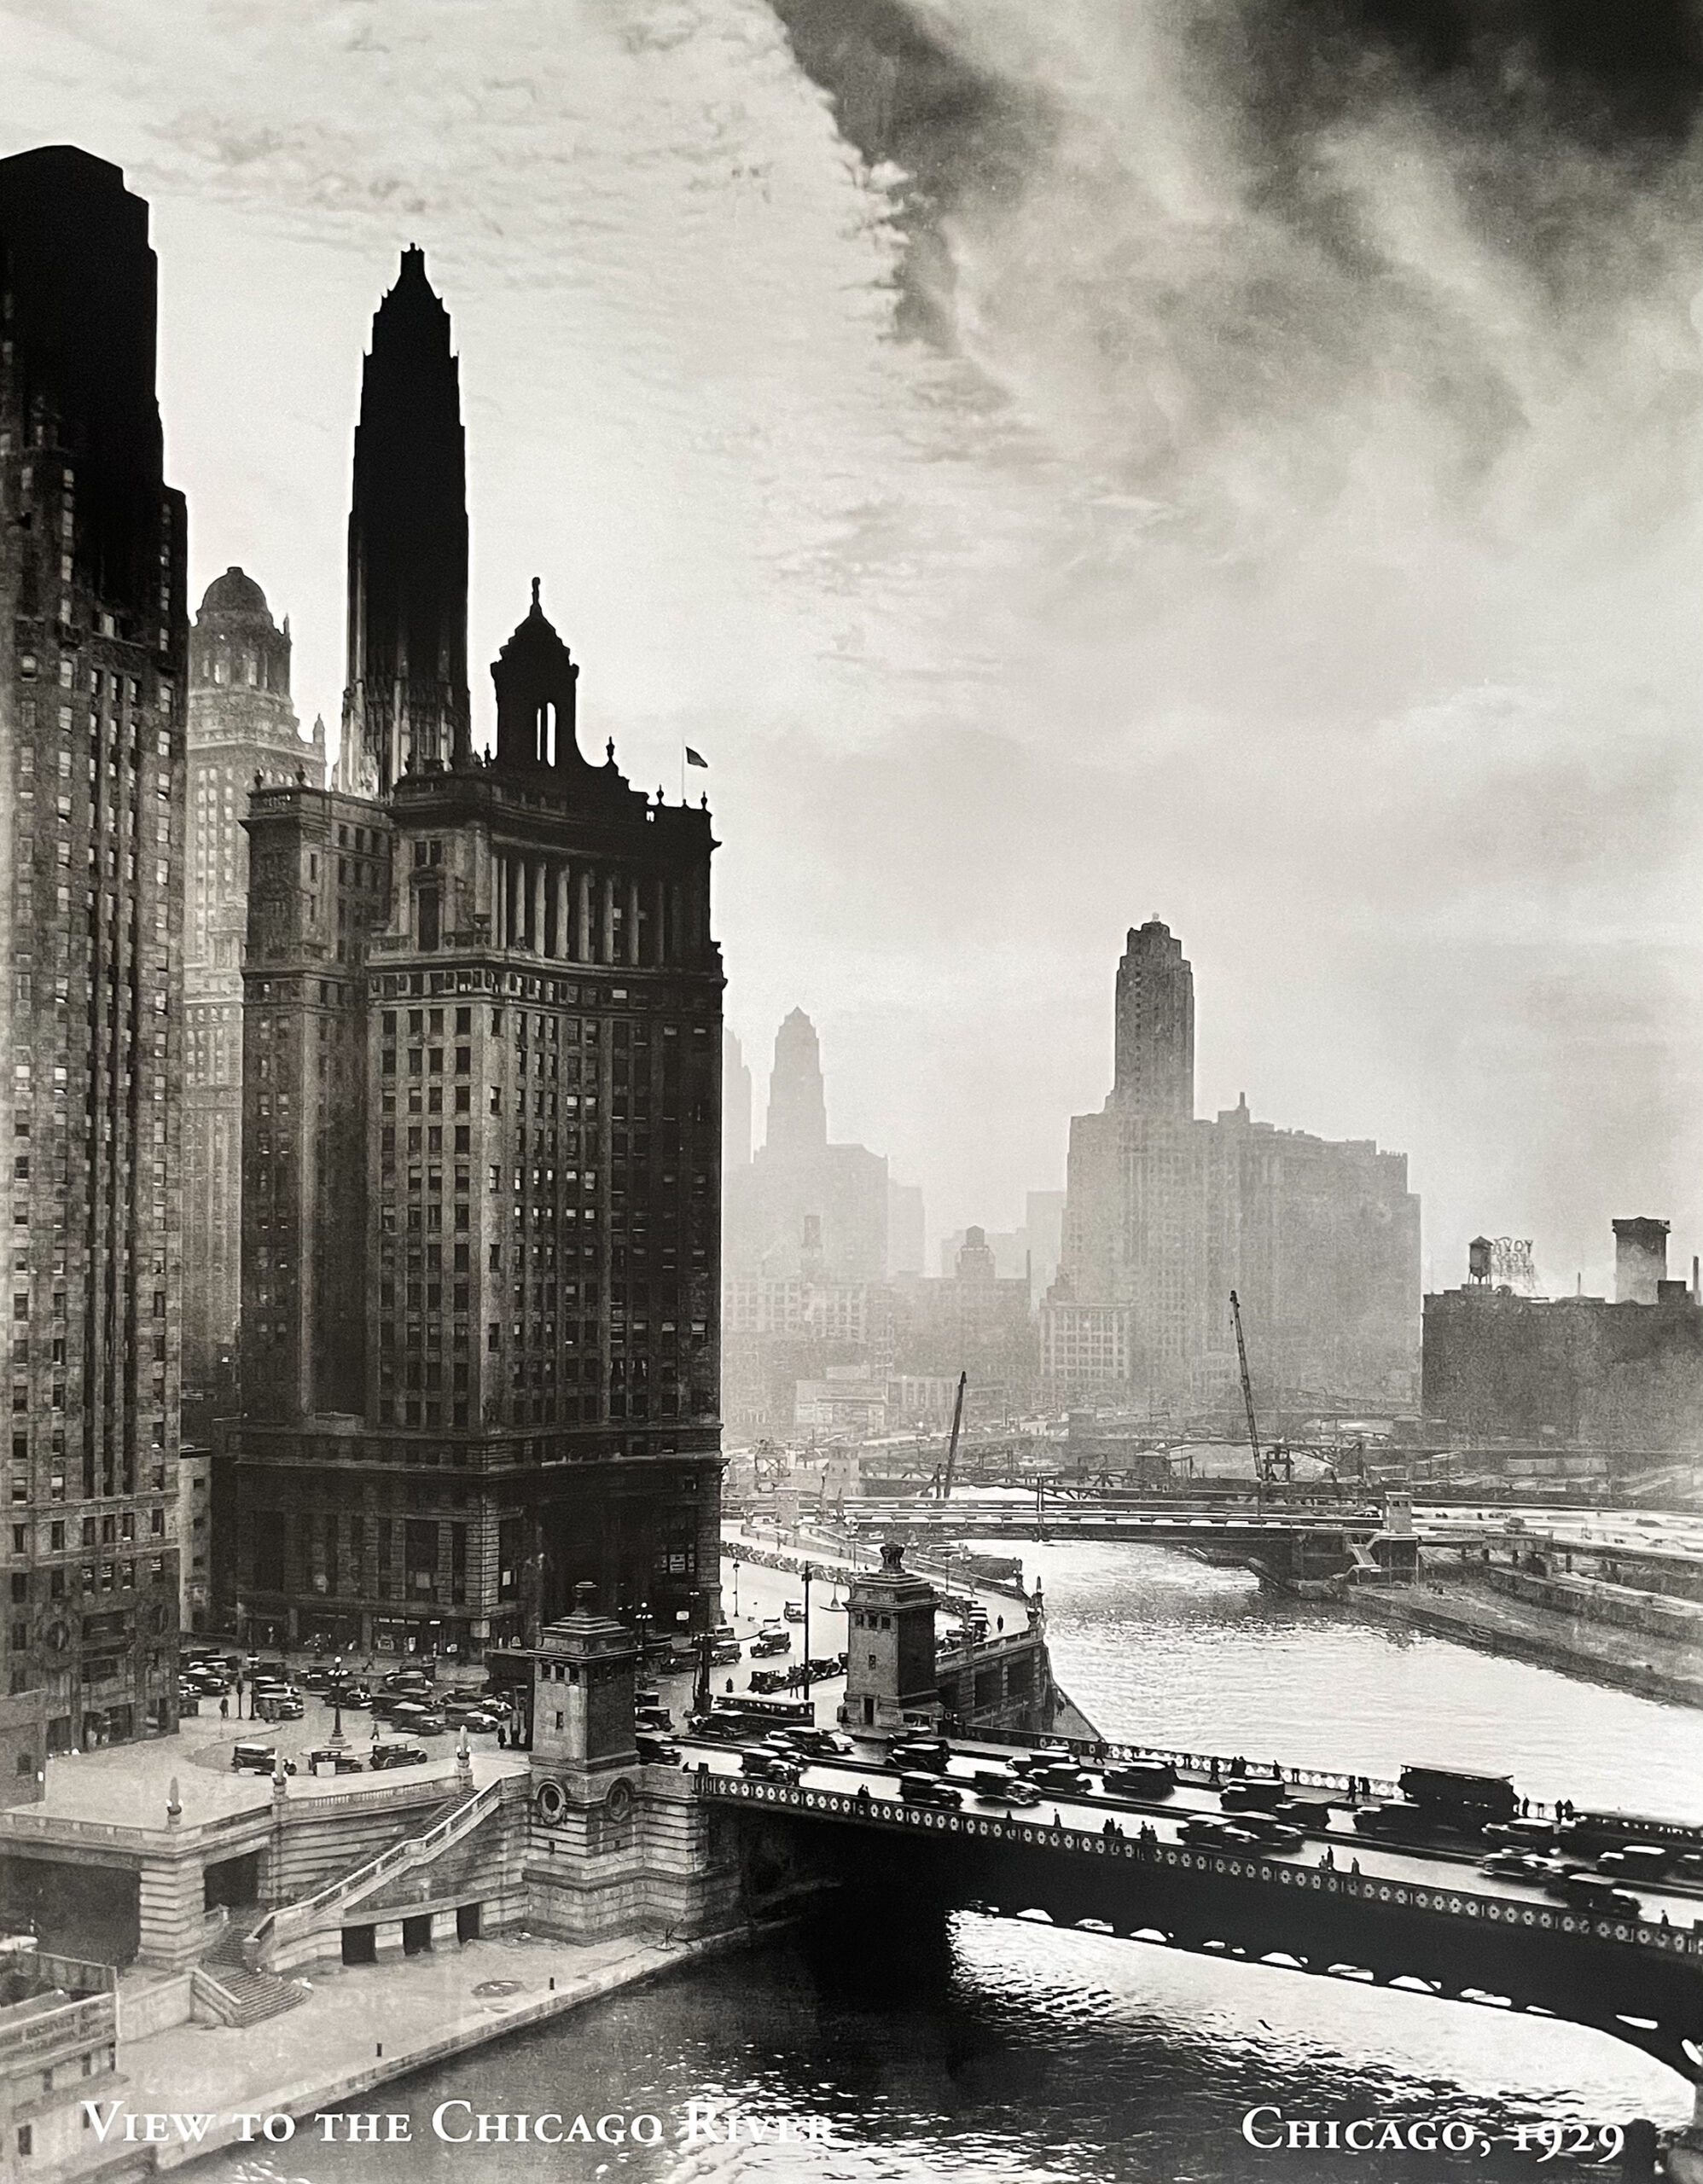 View to the Chicago River, 1930